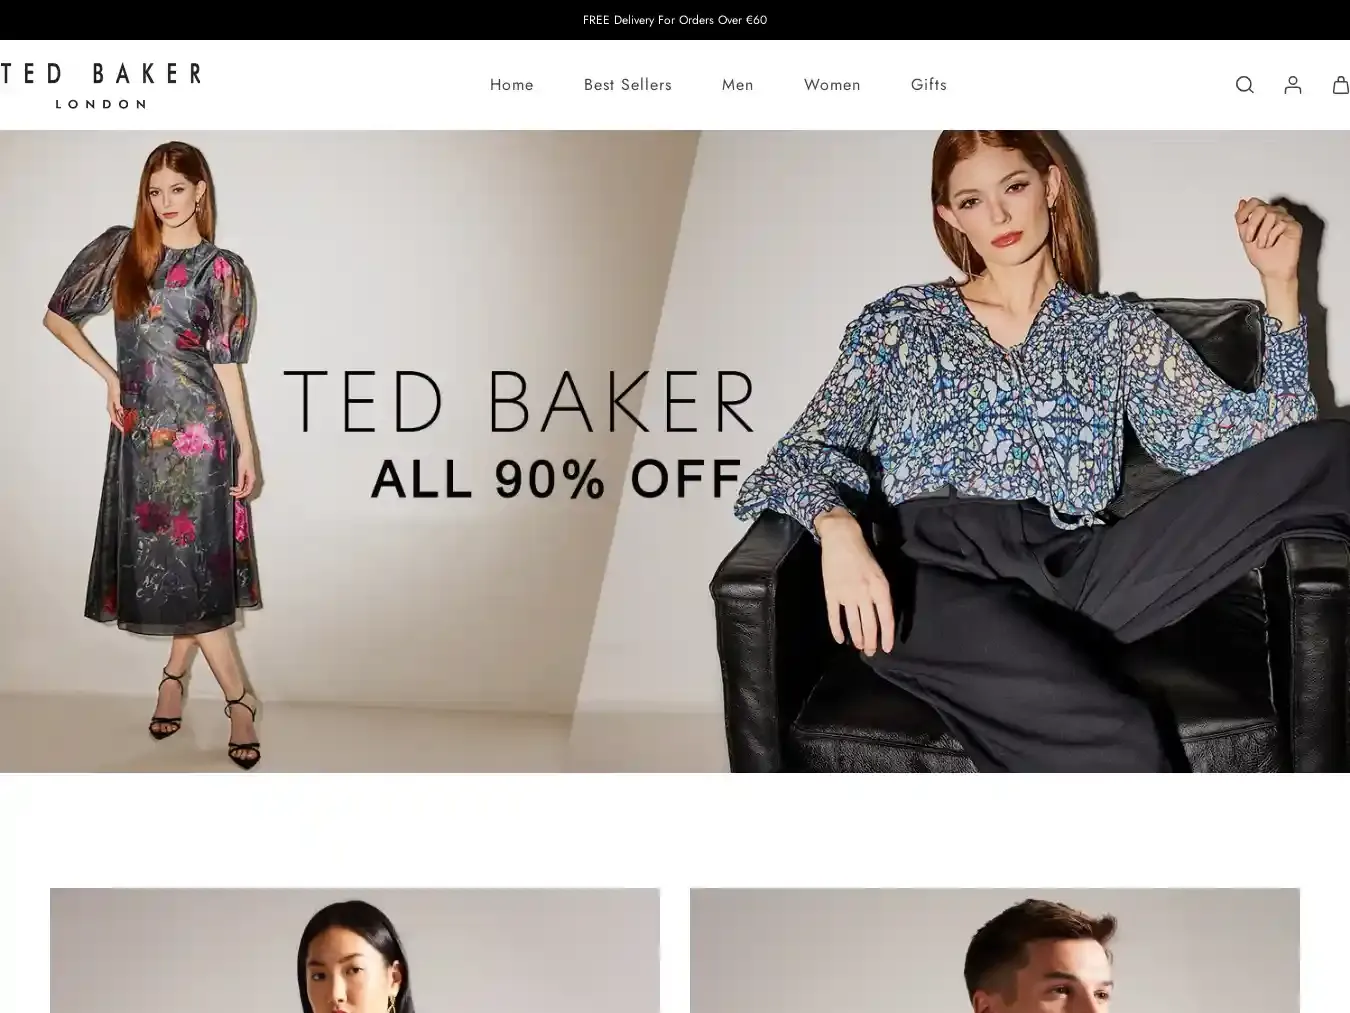 Tedbakerfactorystore.com Fraudulent Non-Delivery website.